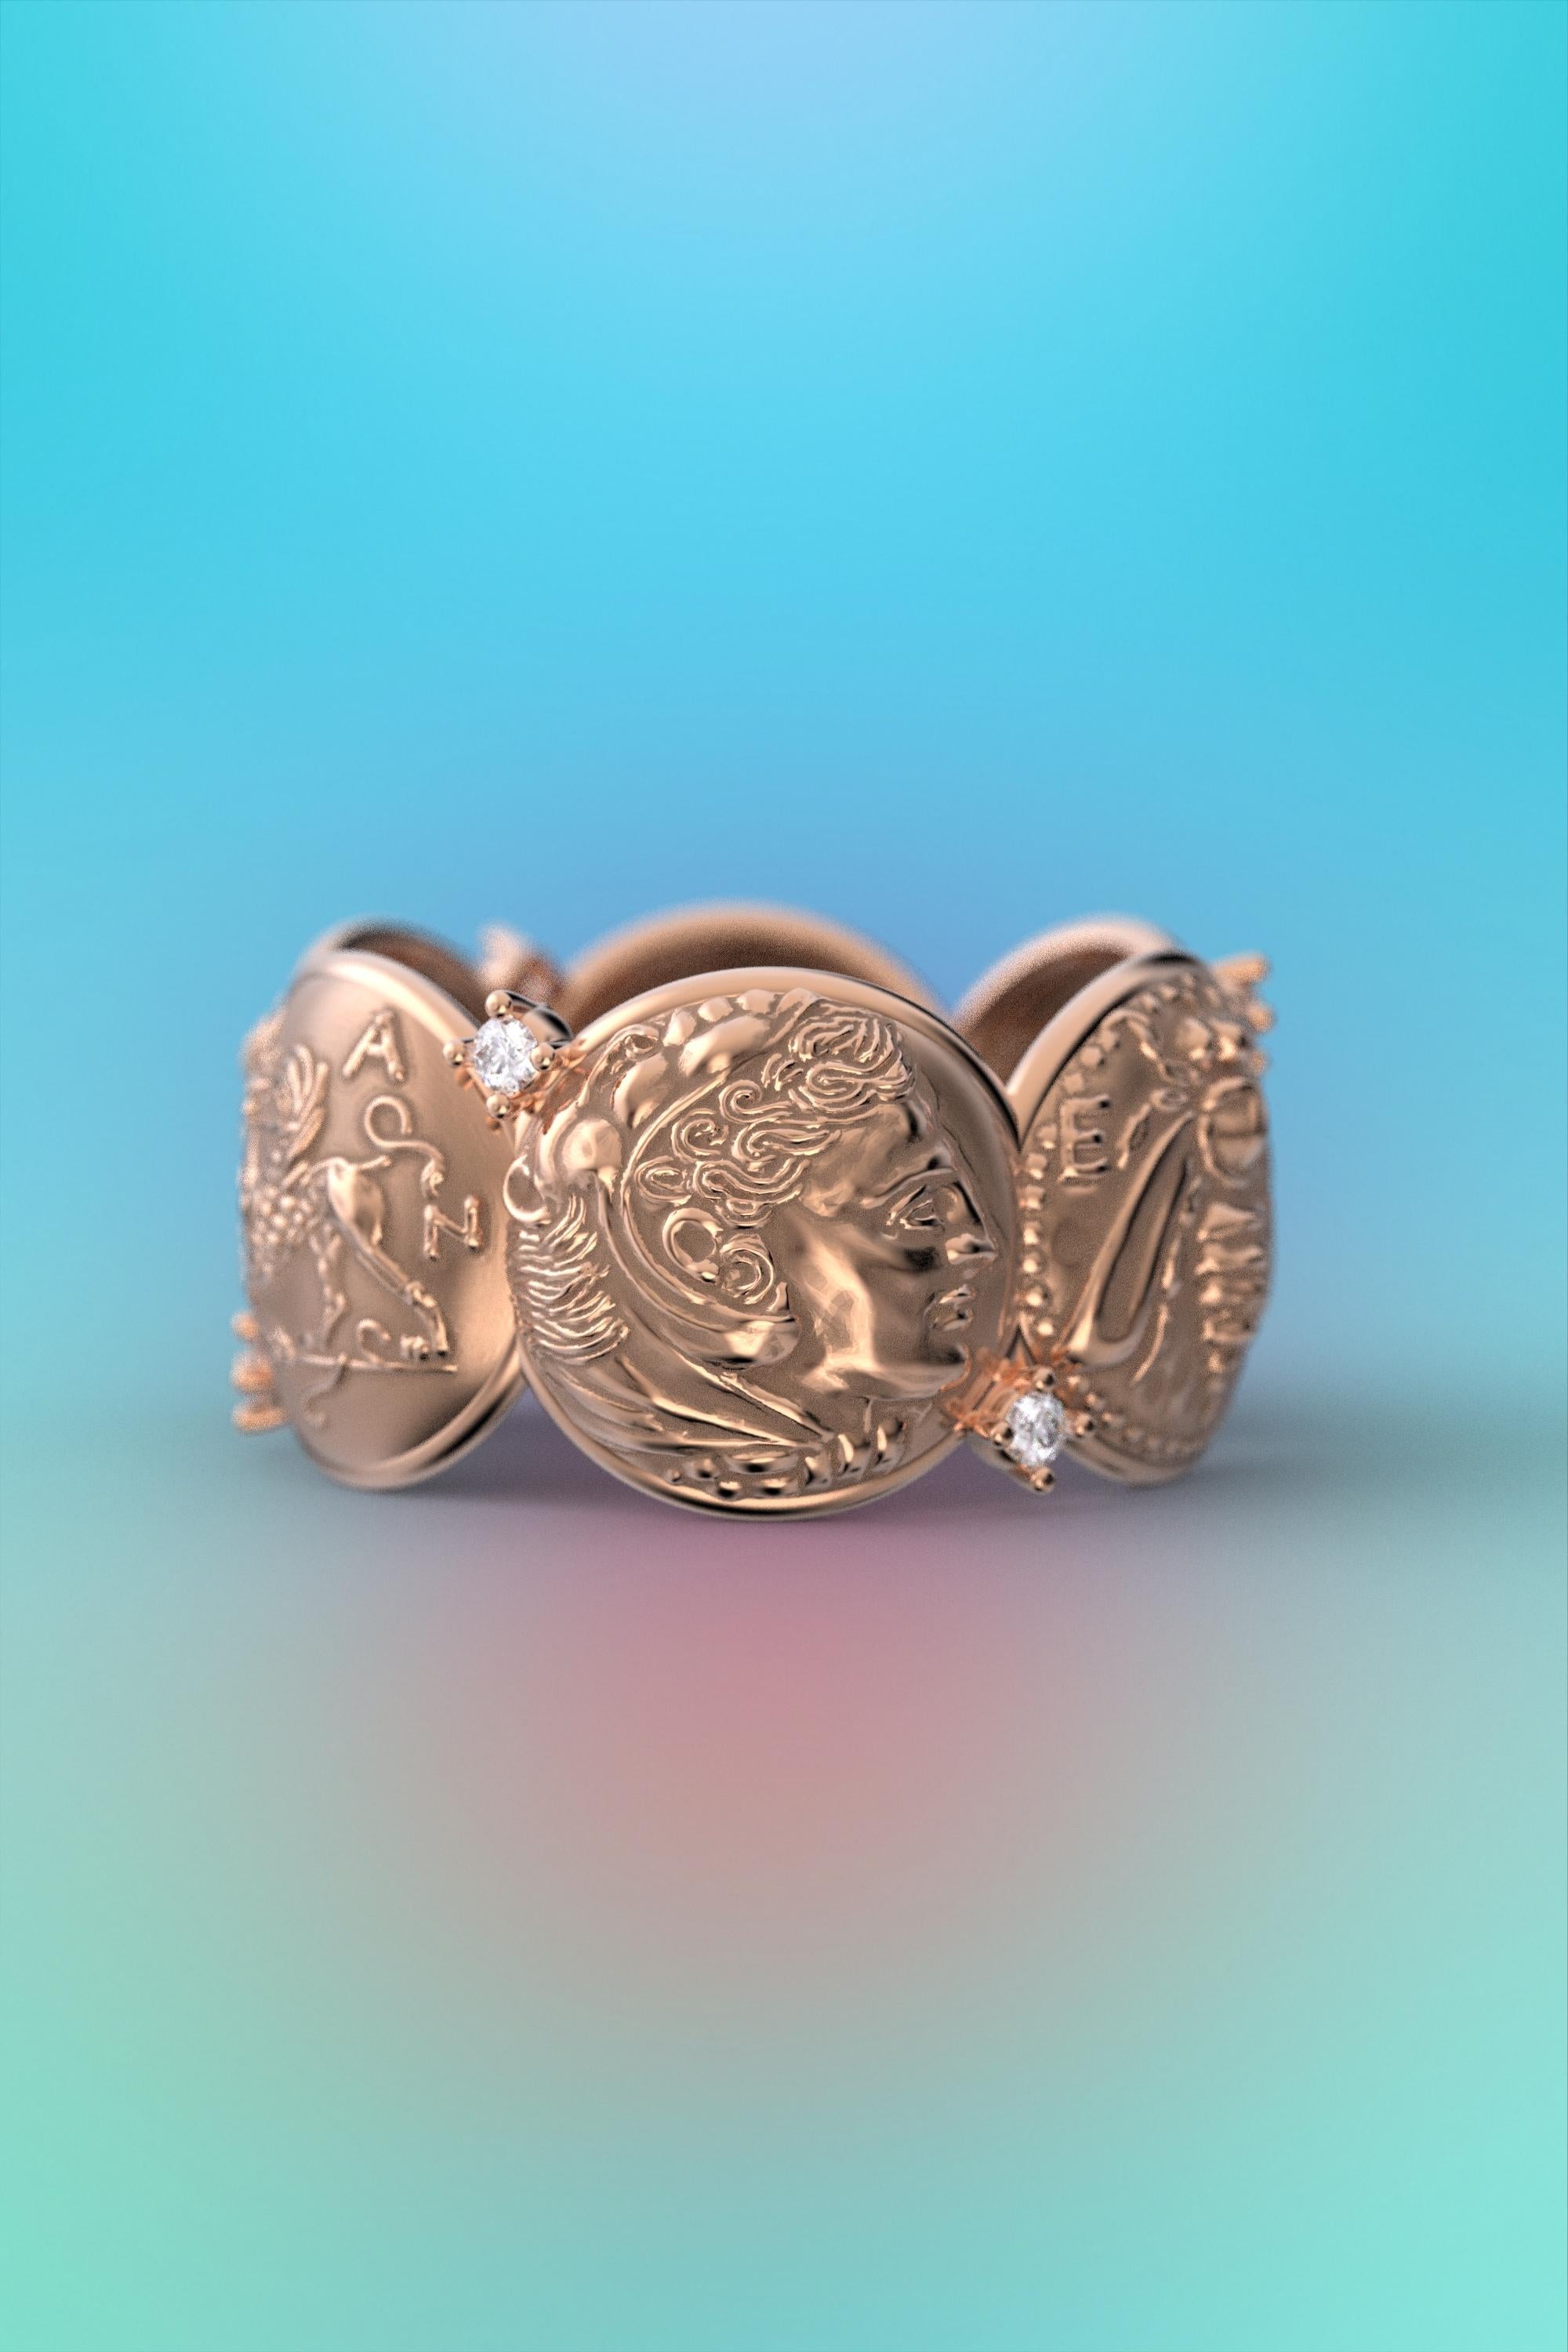 For Sale:  14k Antique Style Gold Ring with Antique Coin Reproductions and Natural Diamonds 7